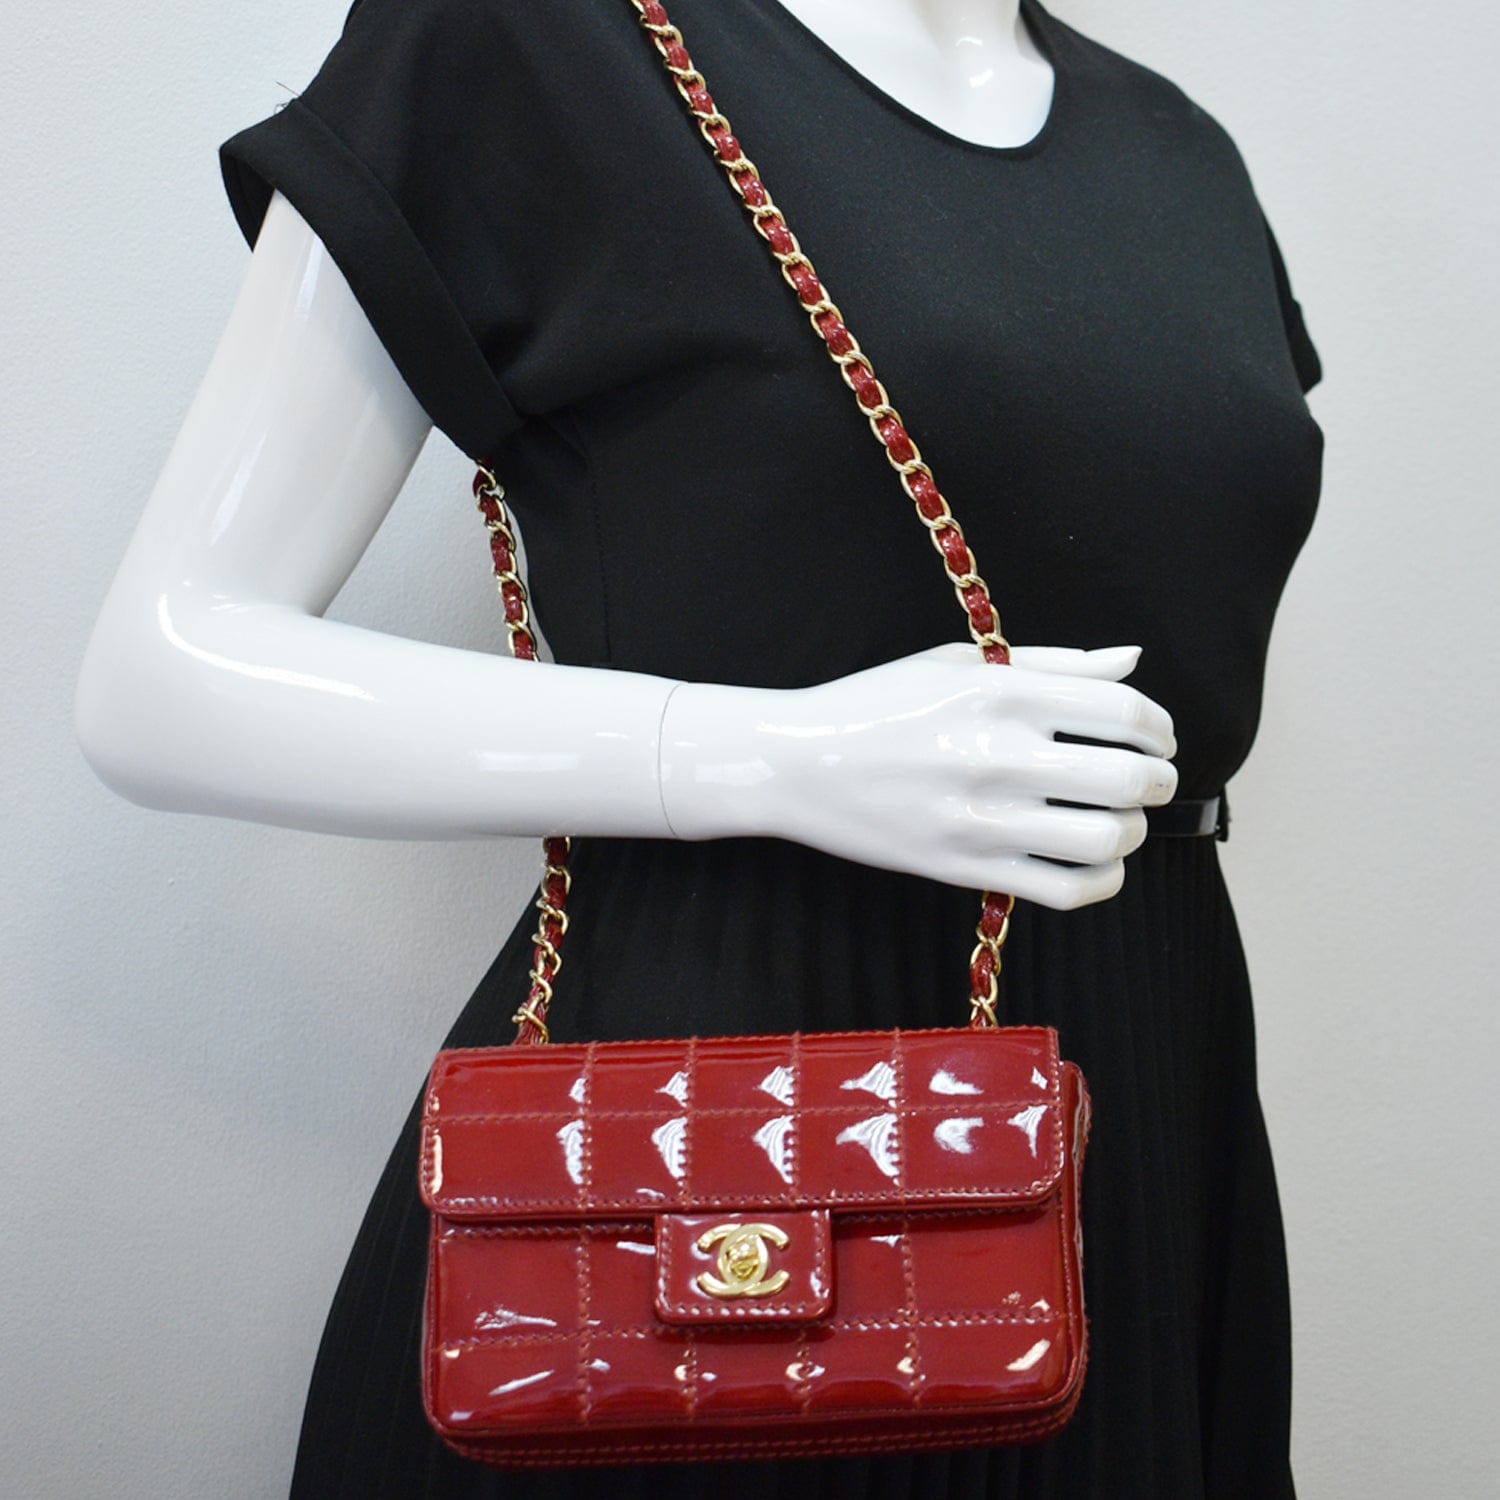 Chanel Patent Calfskin Quilted Medium Double Flap Red